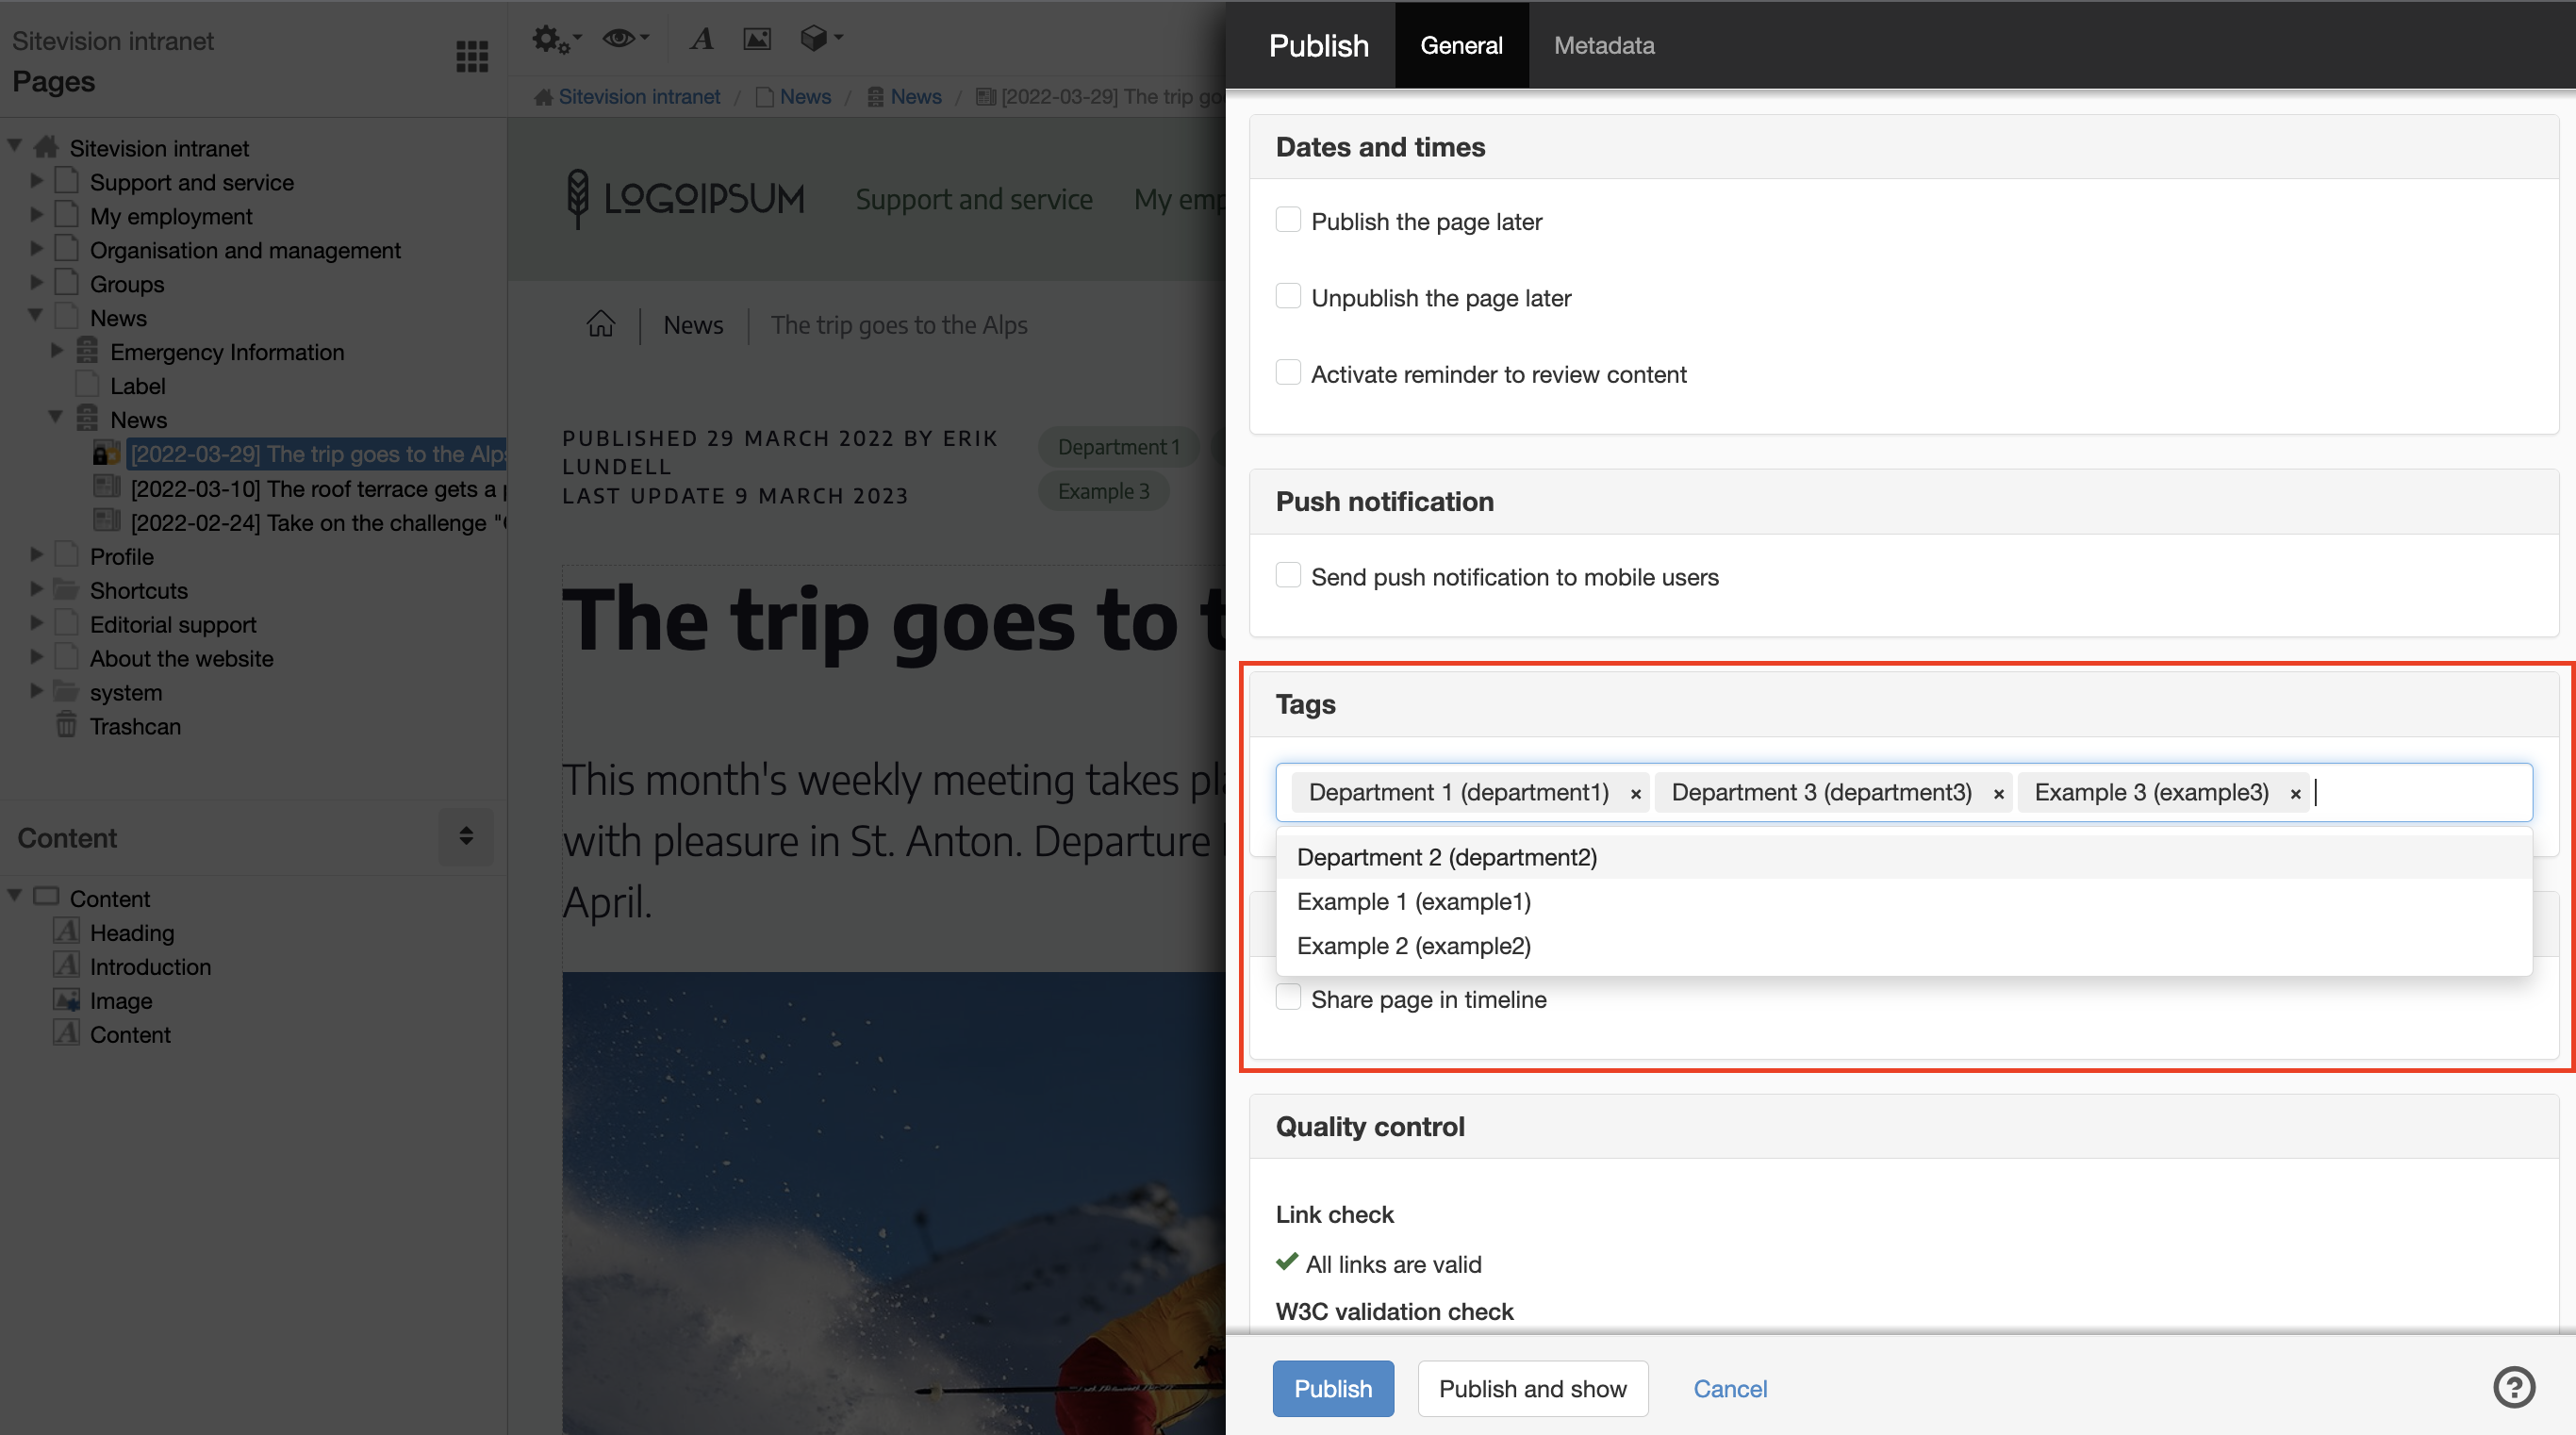 Personalization - Publish news with tags